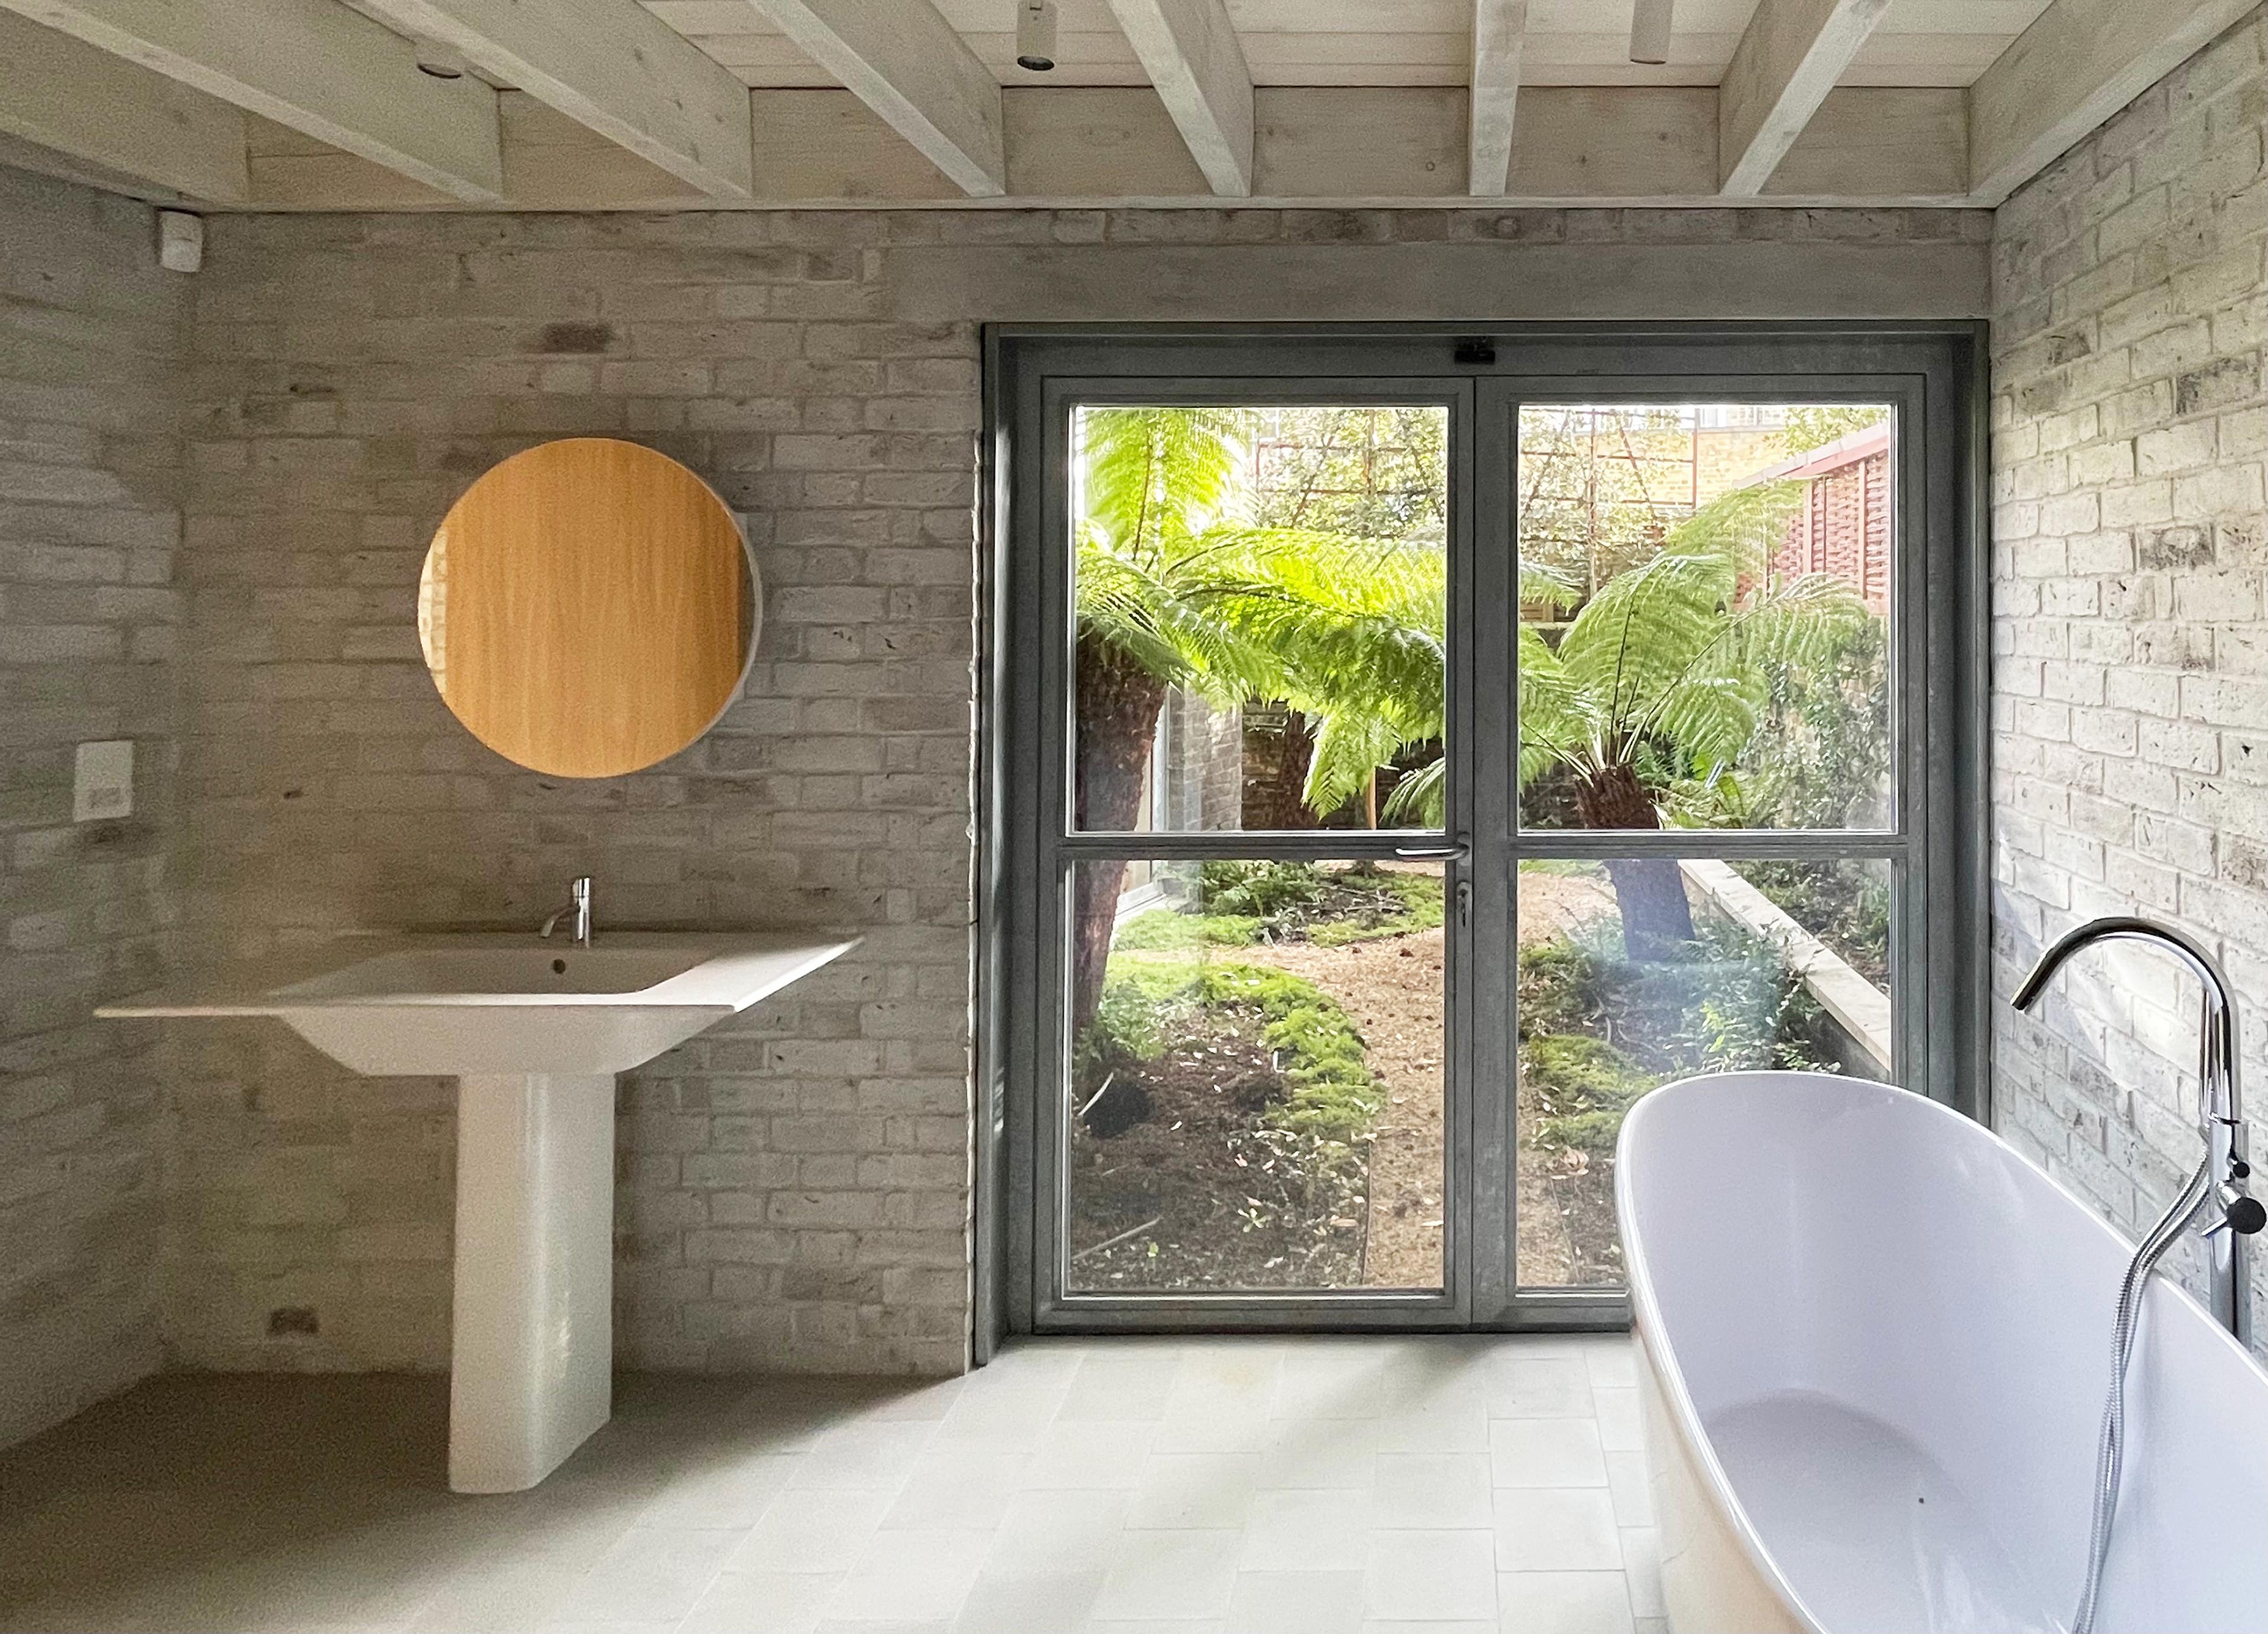 The bathroom opens out to the private courtyard